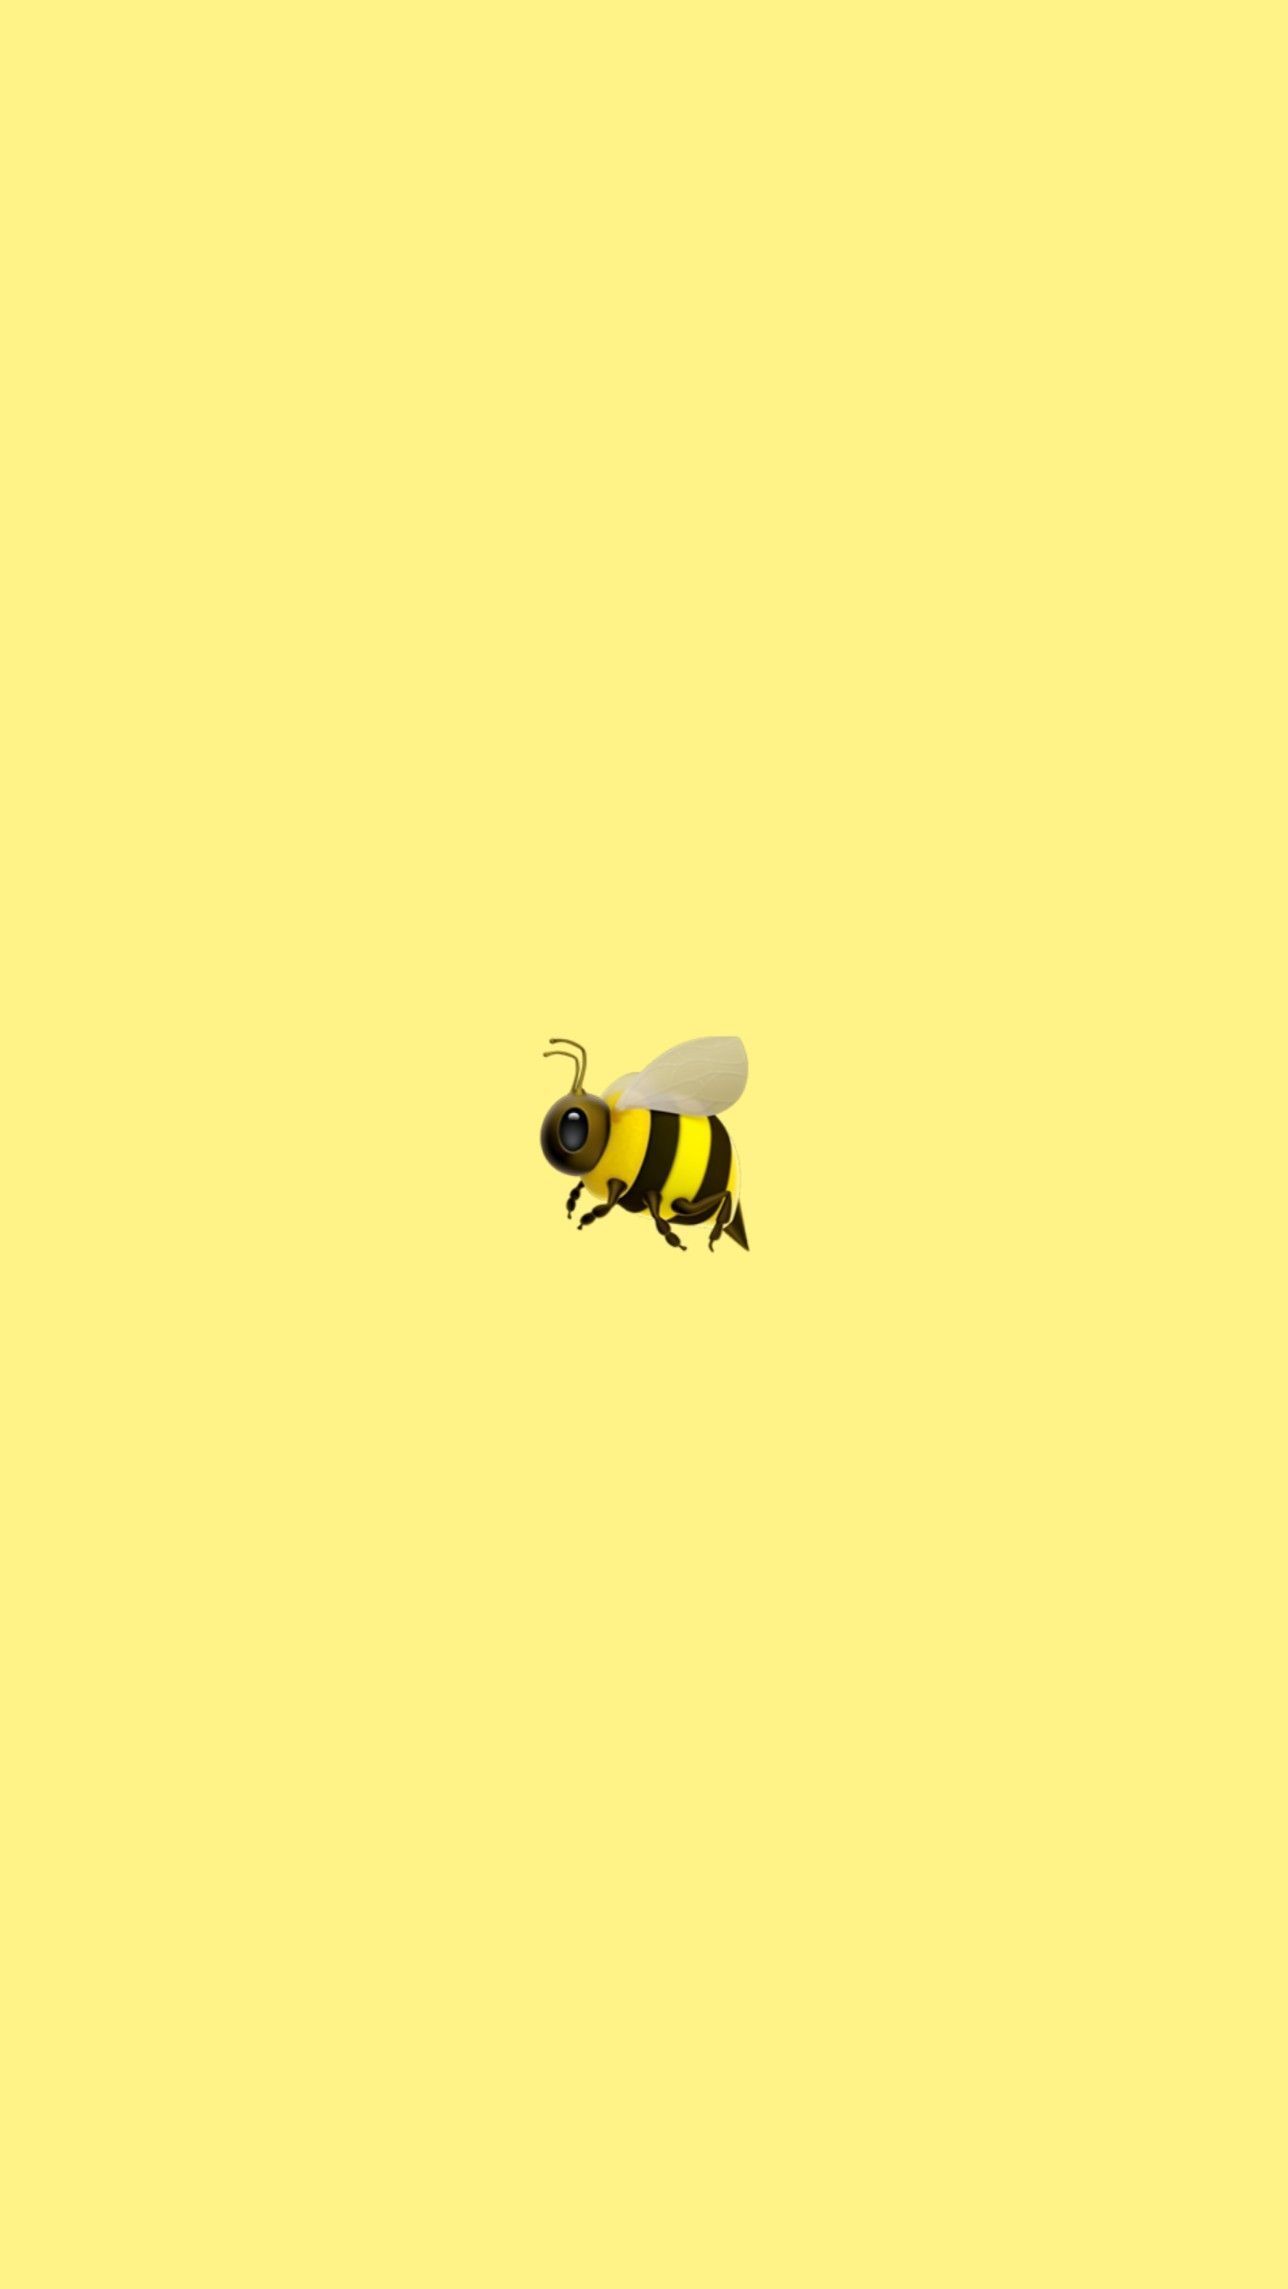 A cute bee illustration on a yellow background - Bee